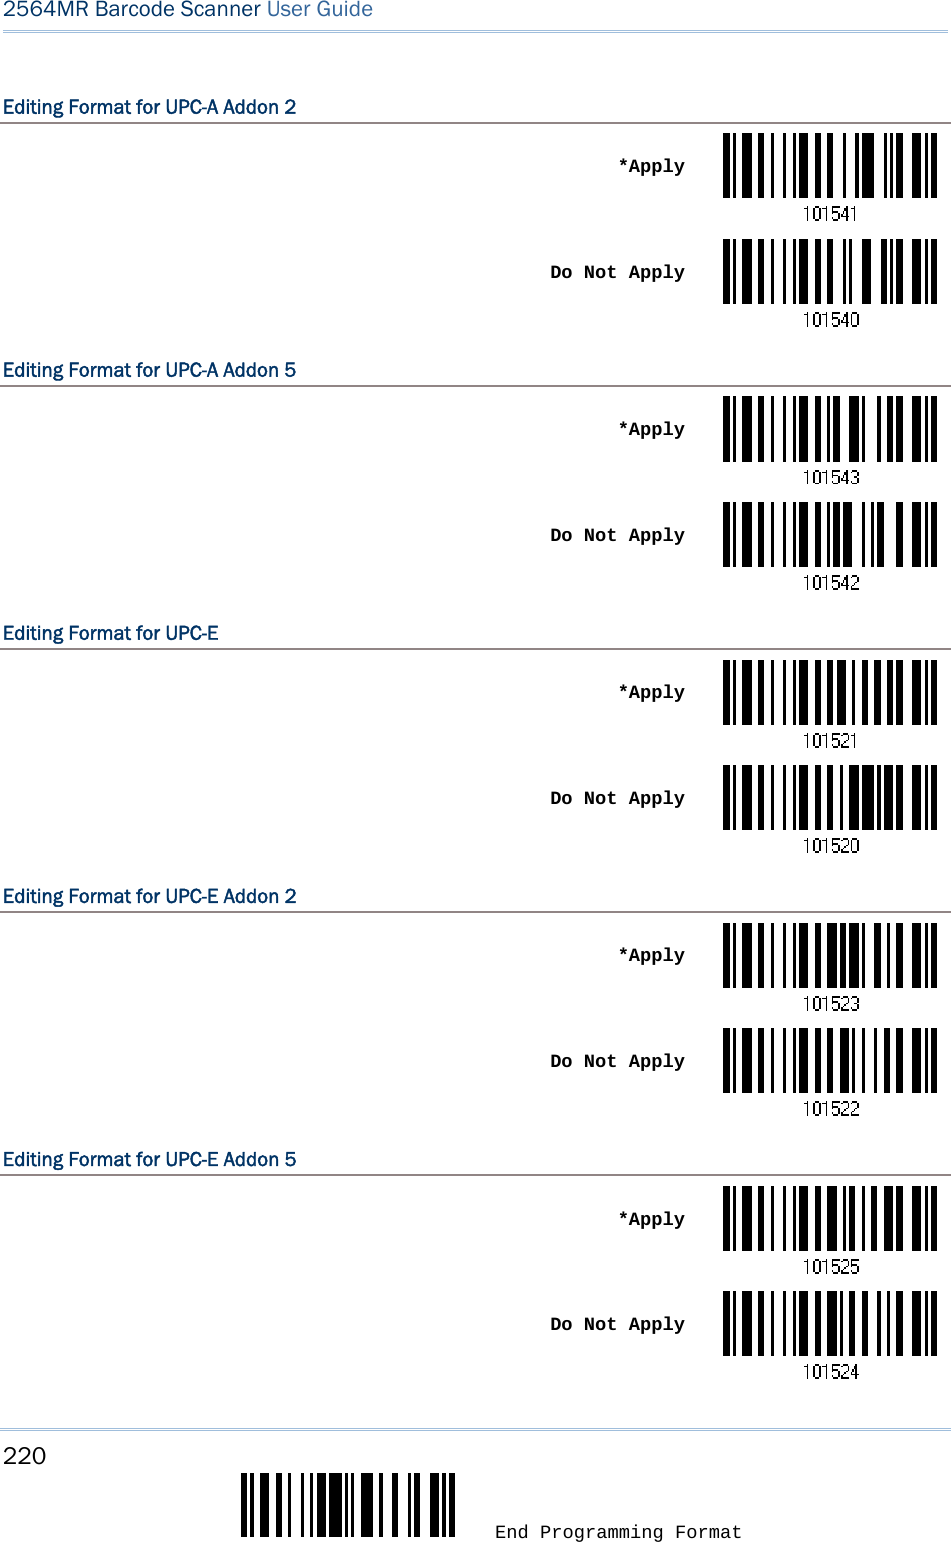 220  End Programming Format 2564MR Barcode Scanner User Guide  Editing Format for UPC-A Addon 2  *Apply Do Not ApplyEditing Format for UPC-A Addon 5  *Apply Do Not ApplyEditing Format for UPC-E  *Apply Do Not ApplyEditing Format for UPC-E Addon 2  *Apply Do Not ApplyEditing Format for UPC-E Addon 5  *Apply Do Not Apply